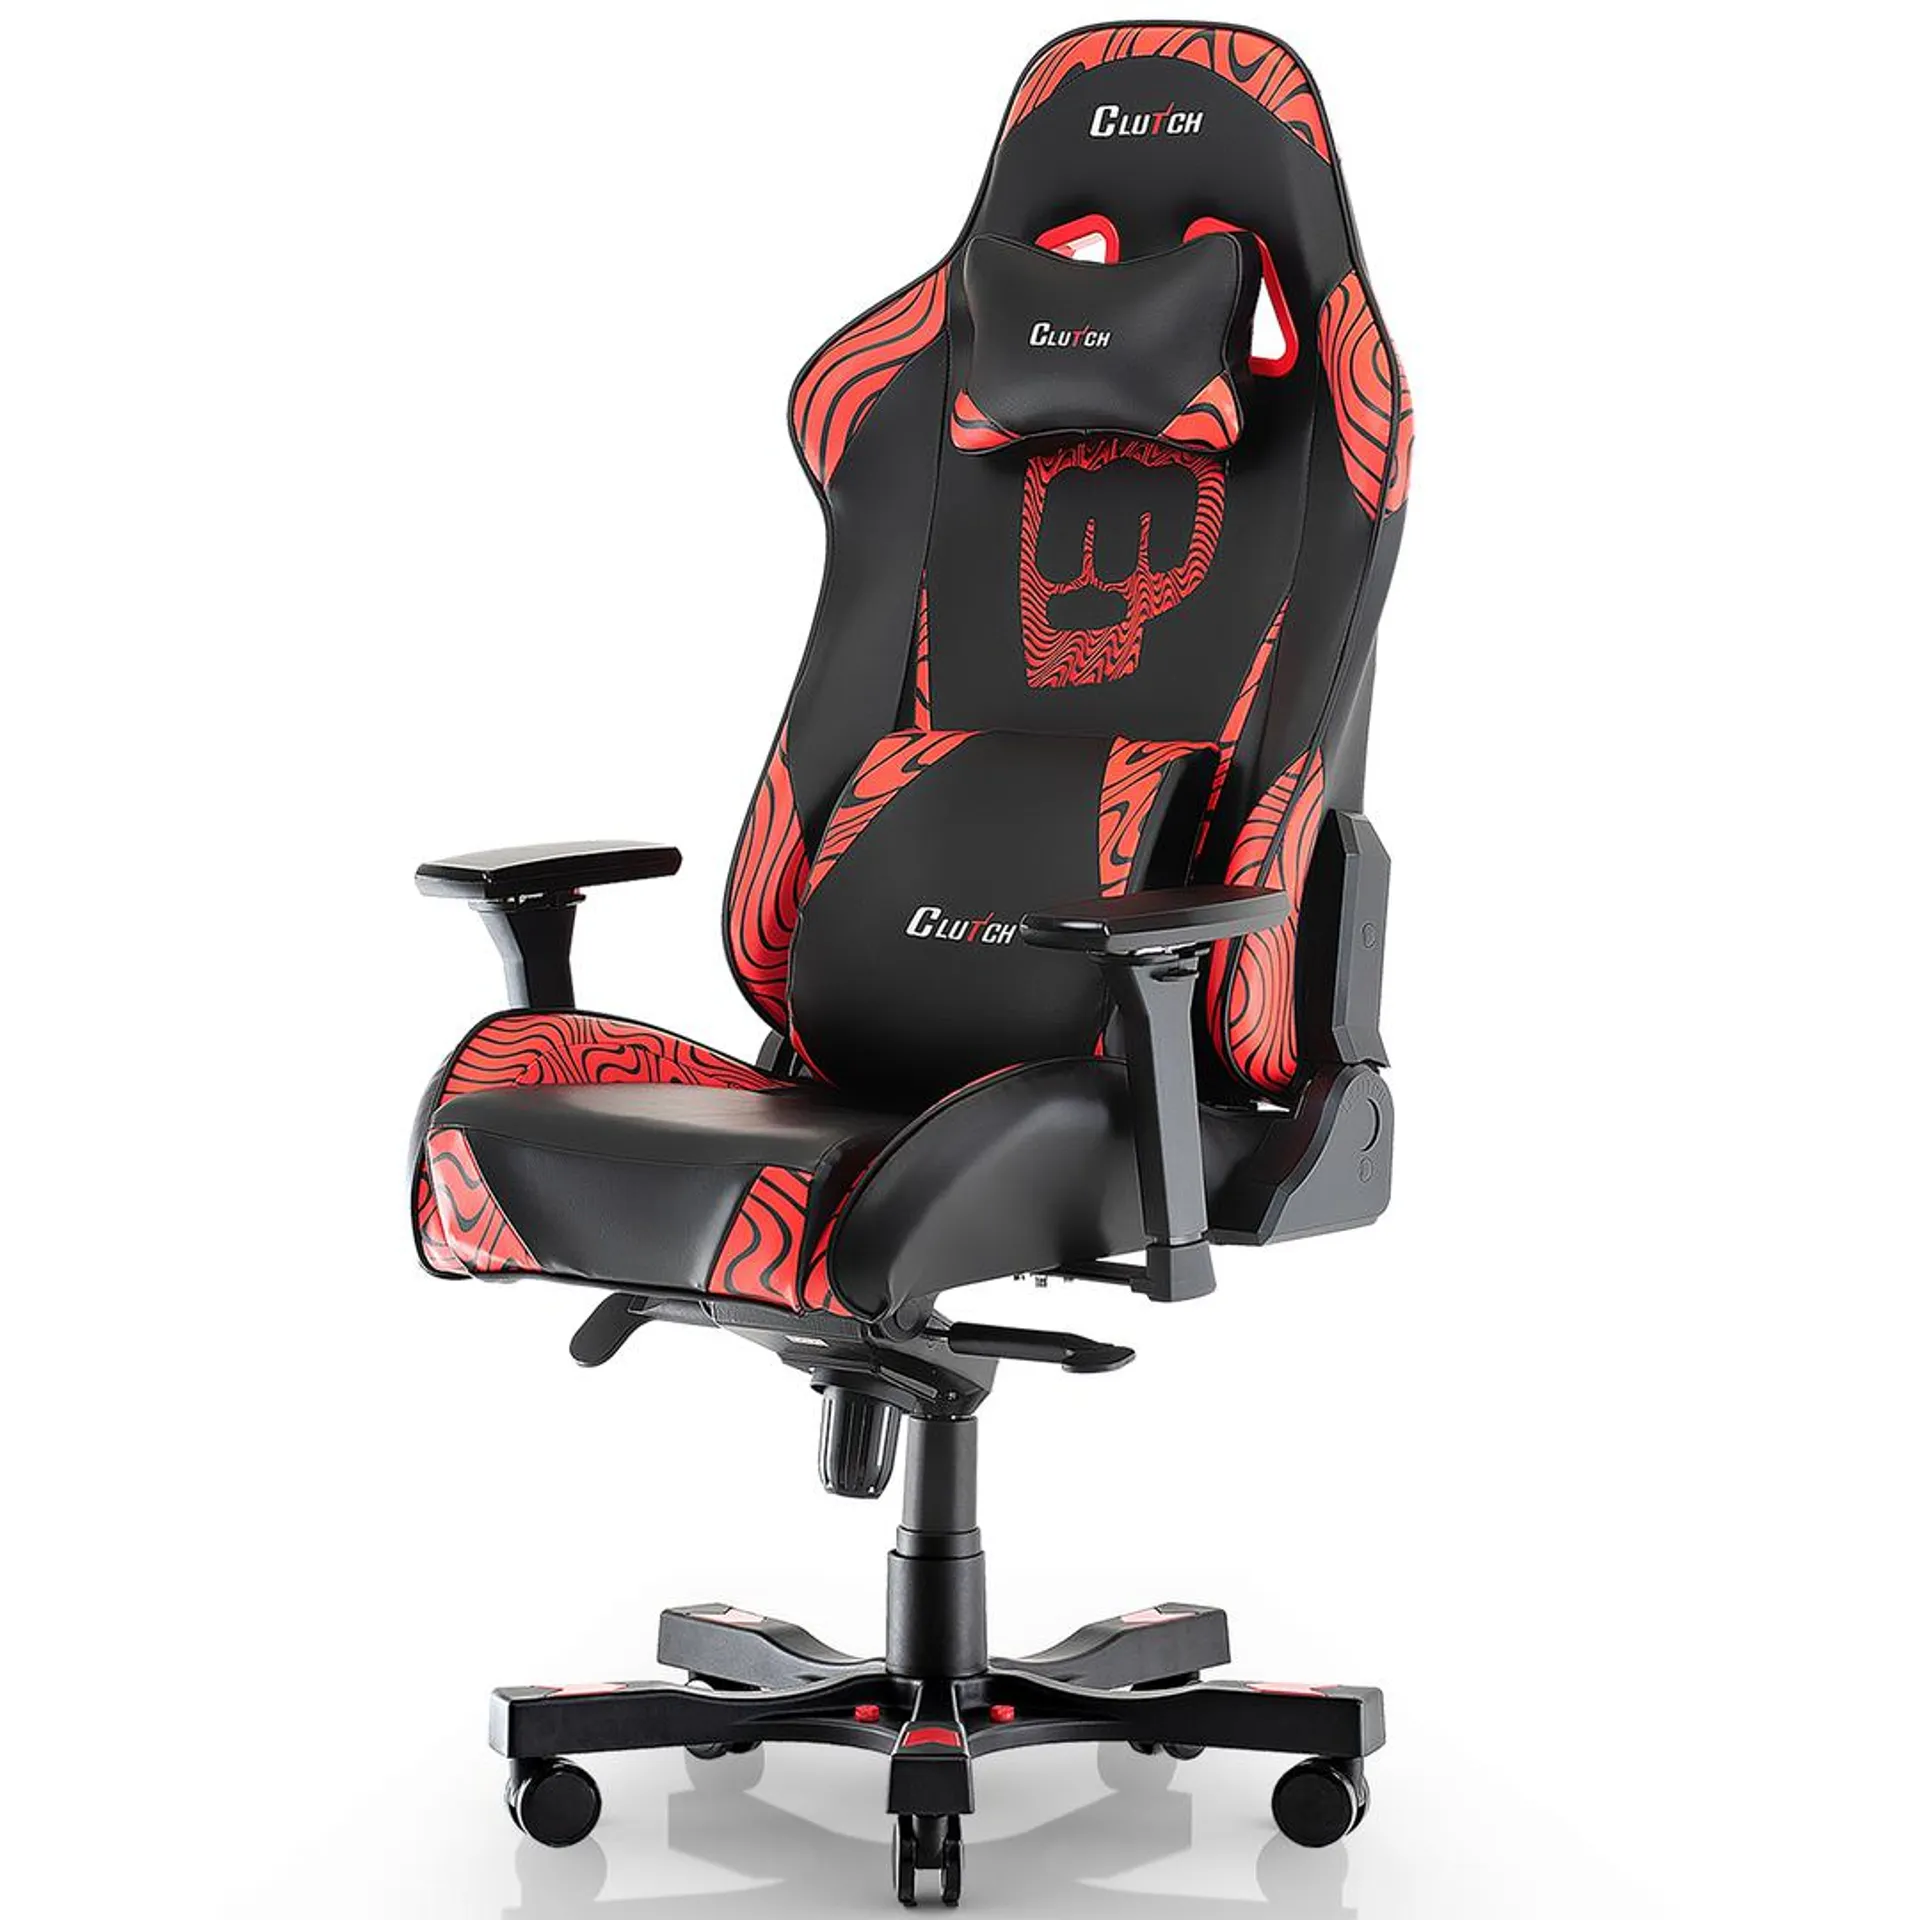 Pewdiepie Red Edition Gaming Chair | Clutch Chairz